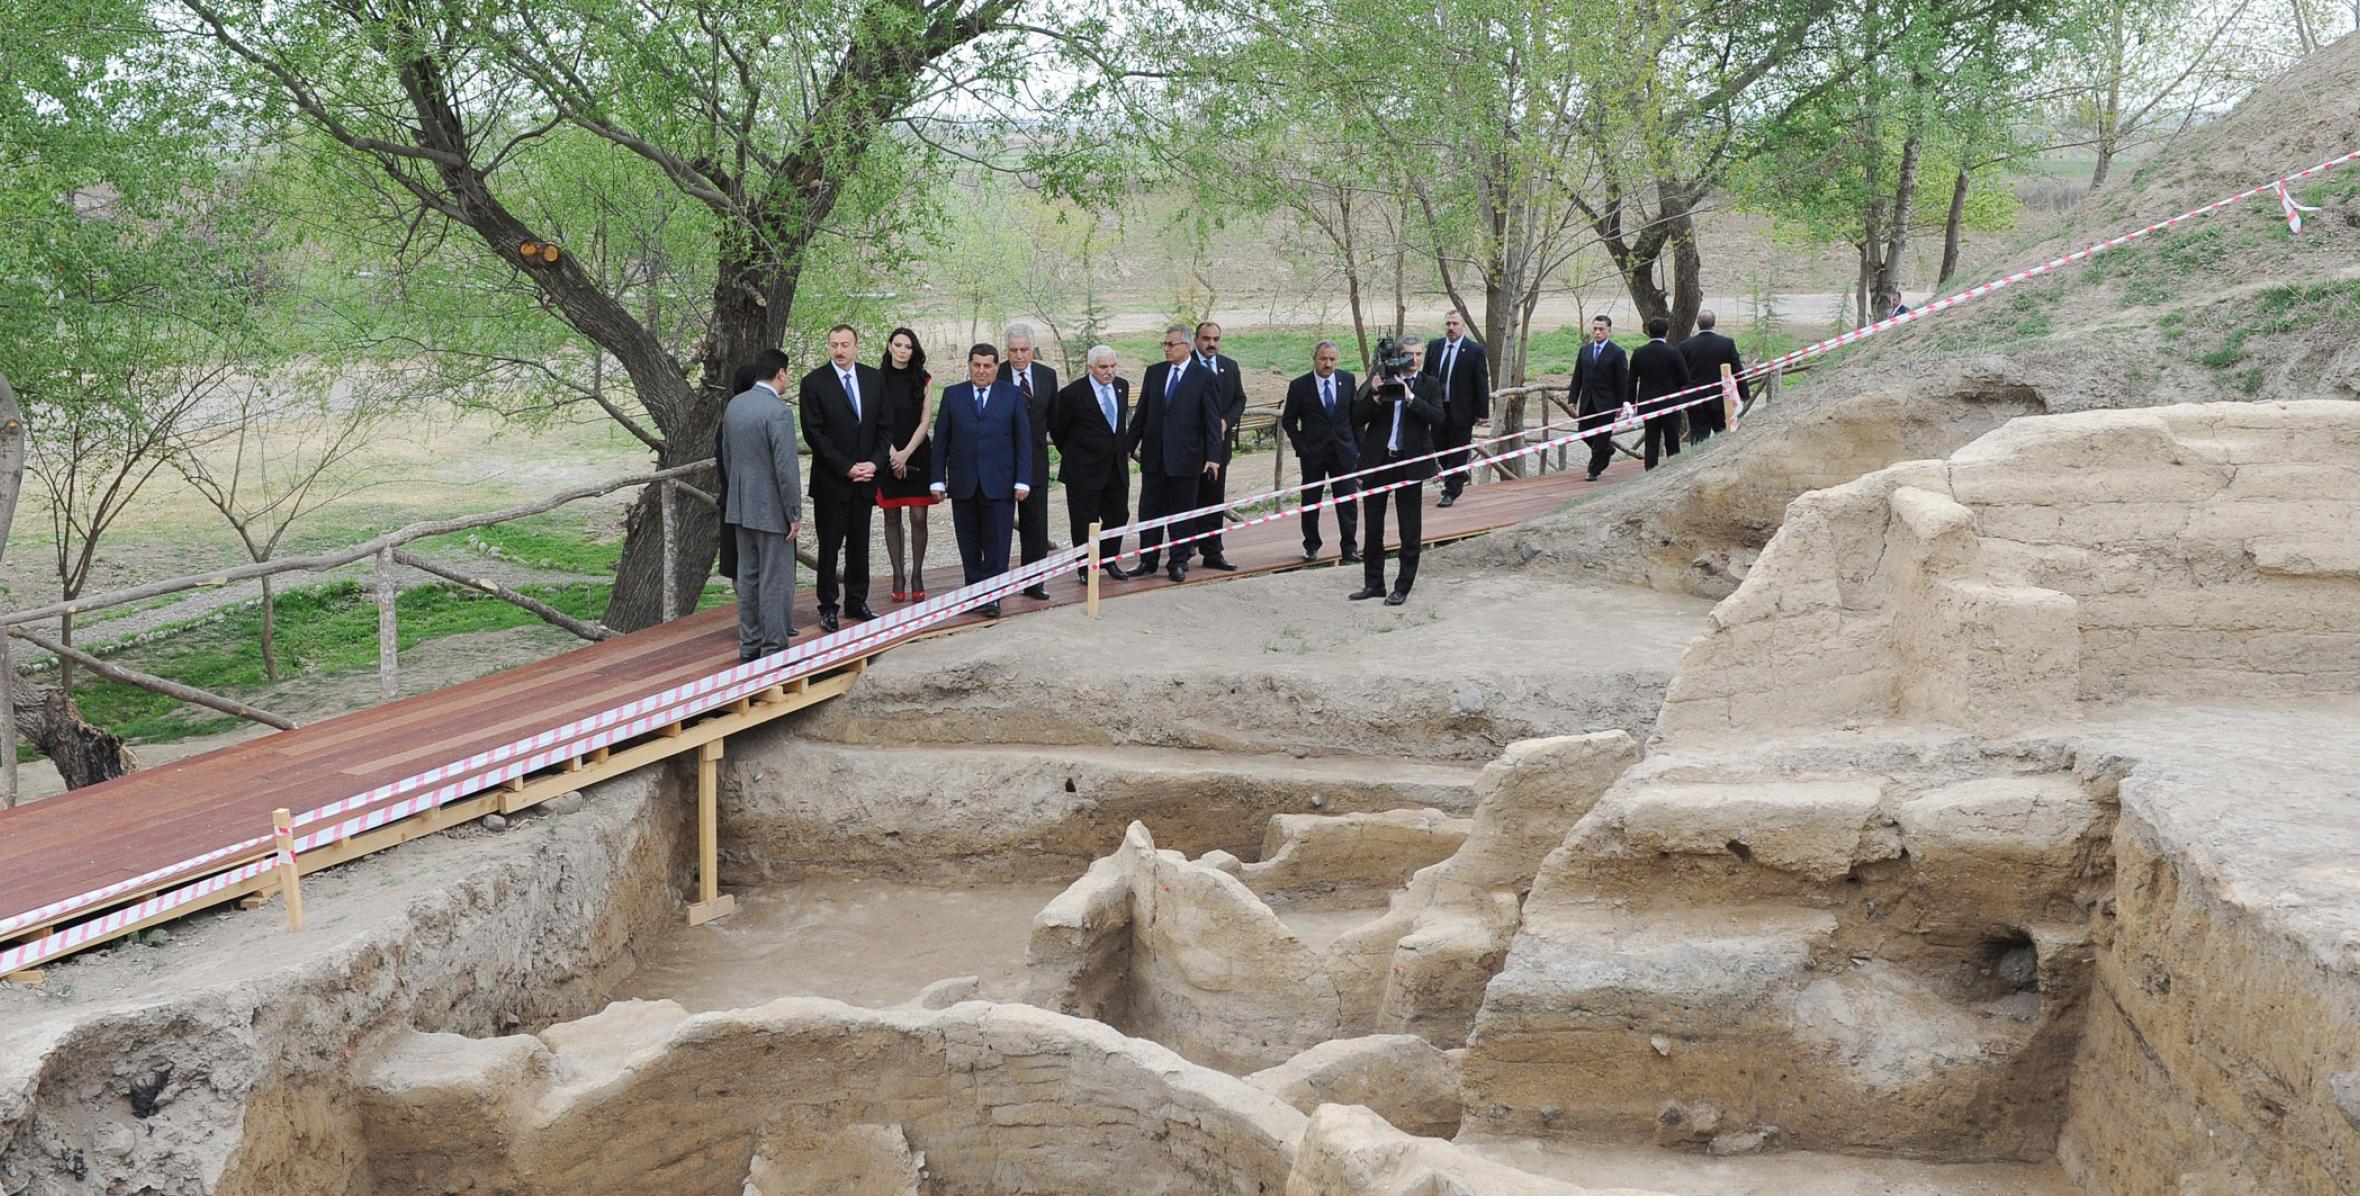 Ilham Aliyev visited the archaeological site of the Neolithic period Goytapa in Tovuz District